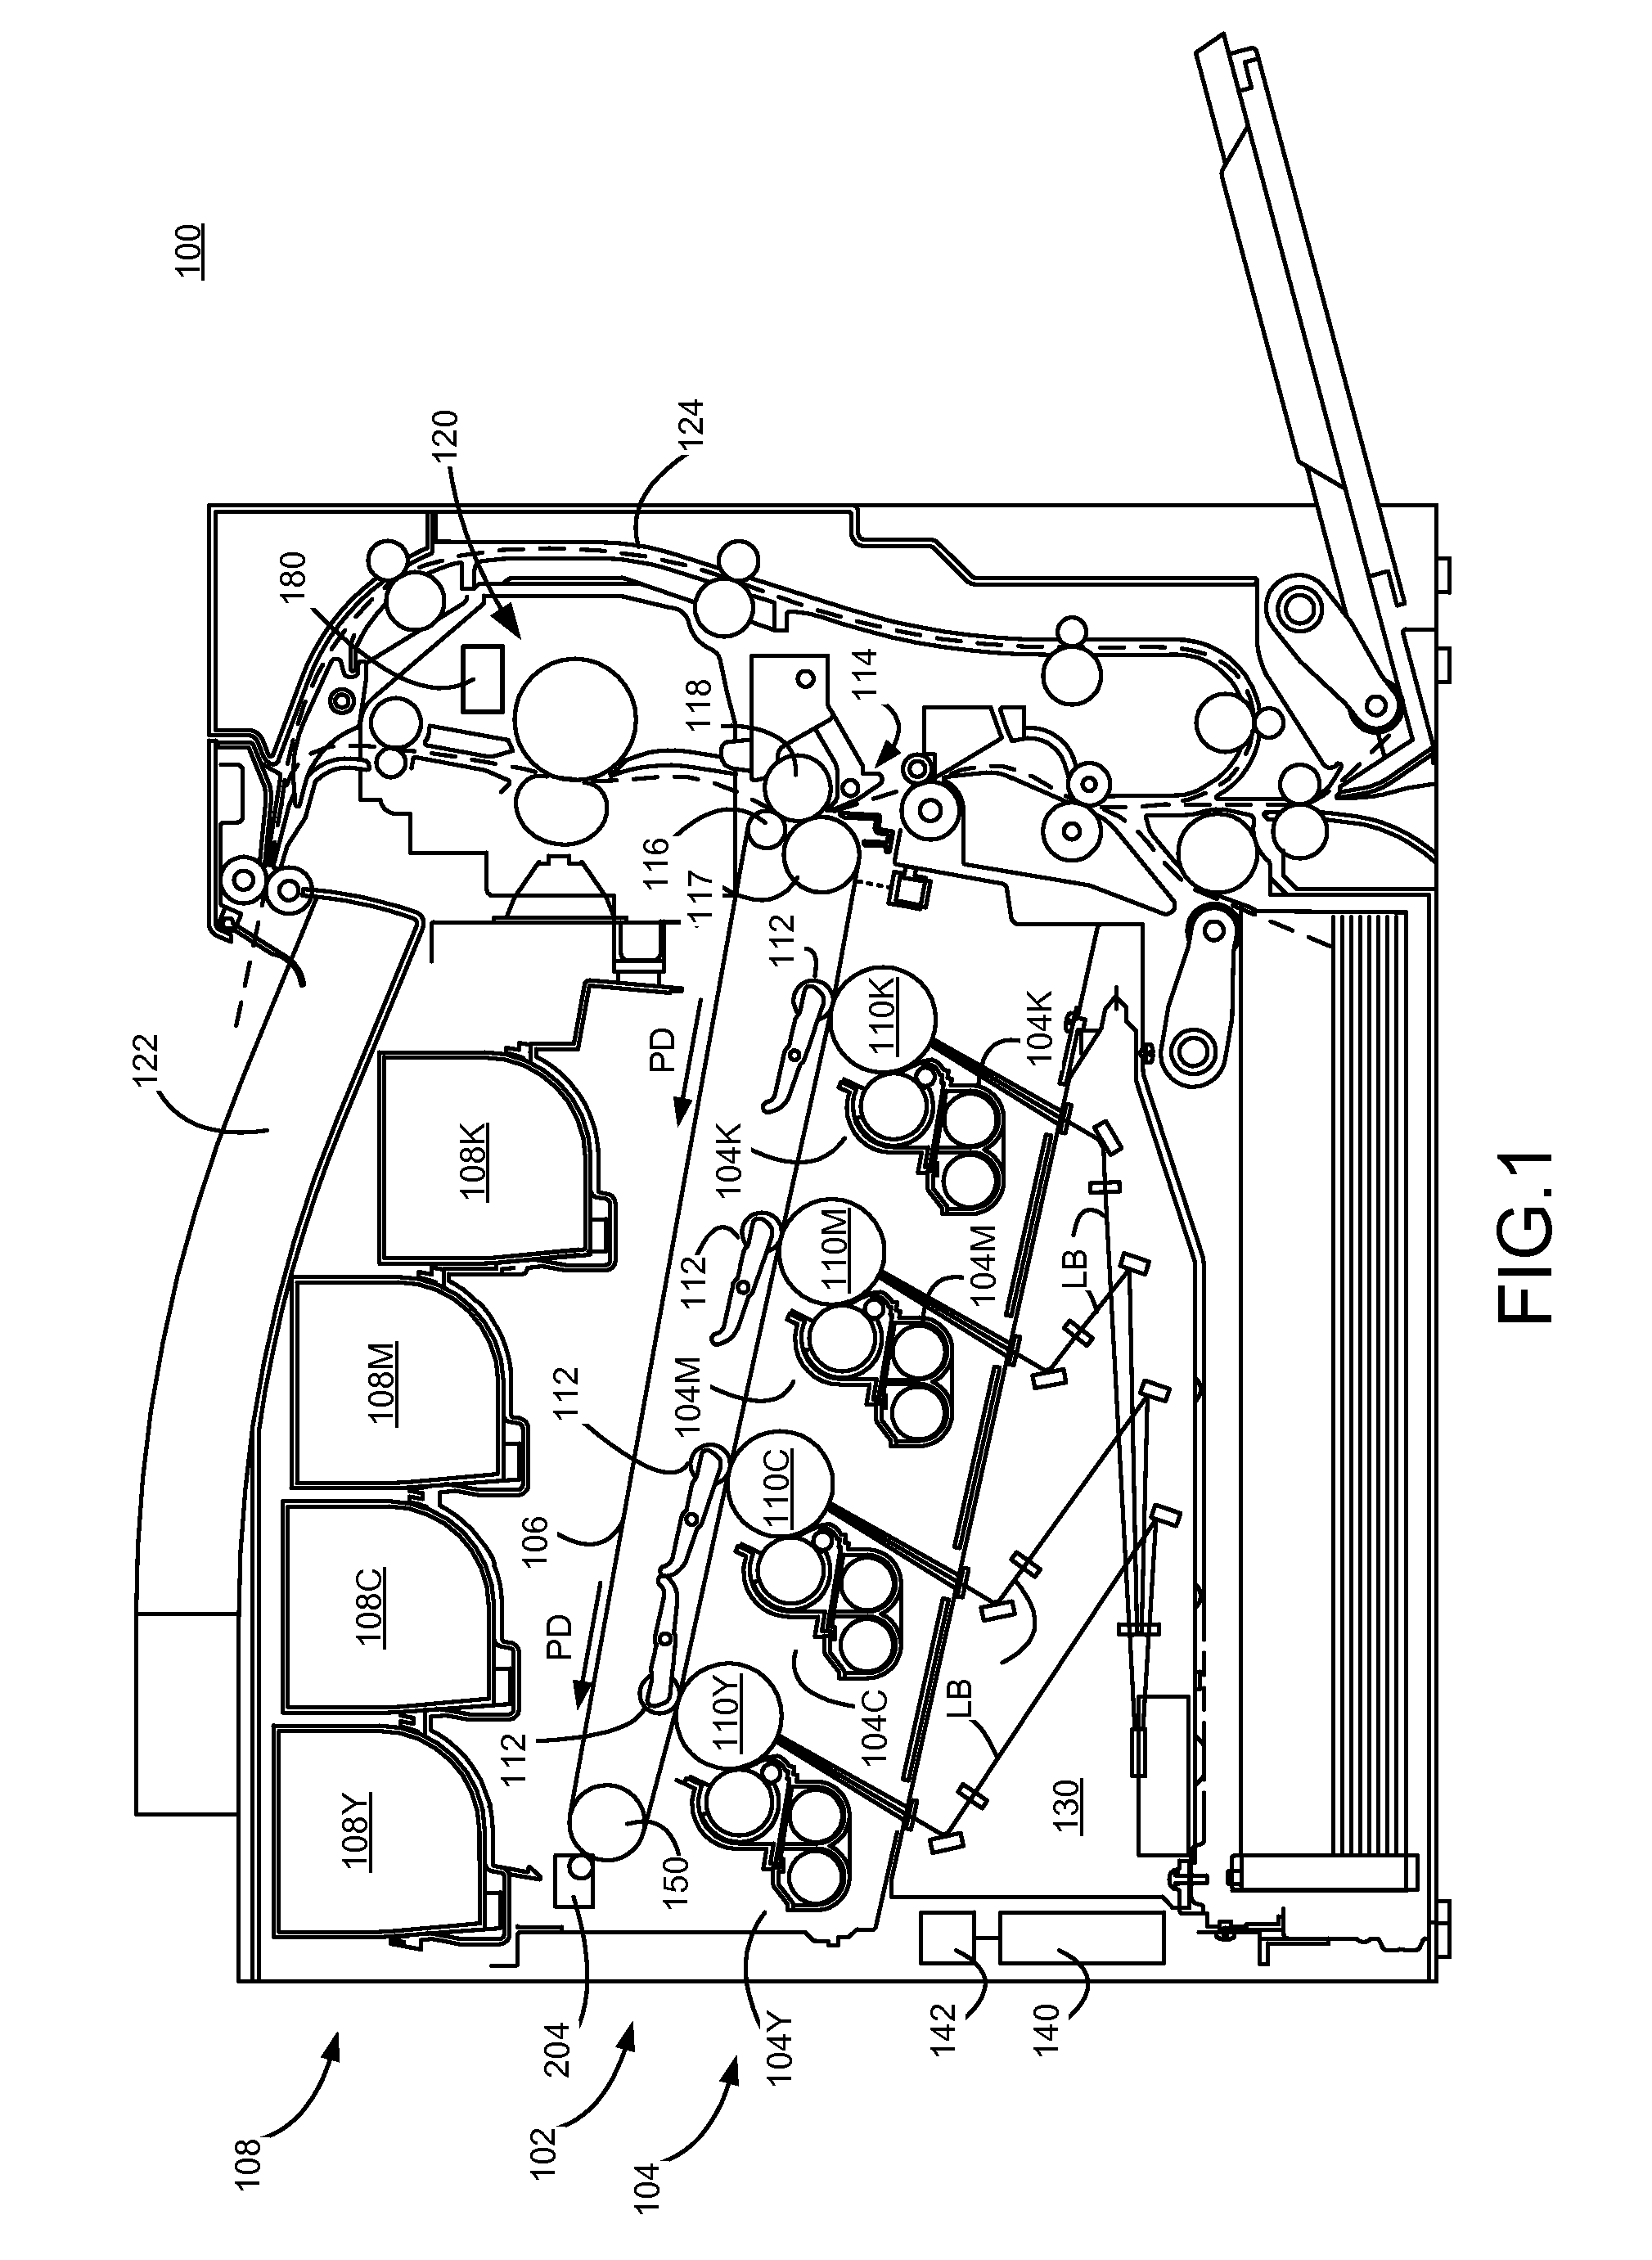 Drive mechanism for an intermediate transfer member module of an electrophotographic imaging device